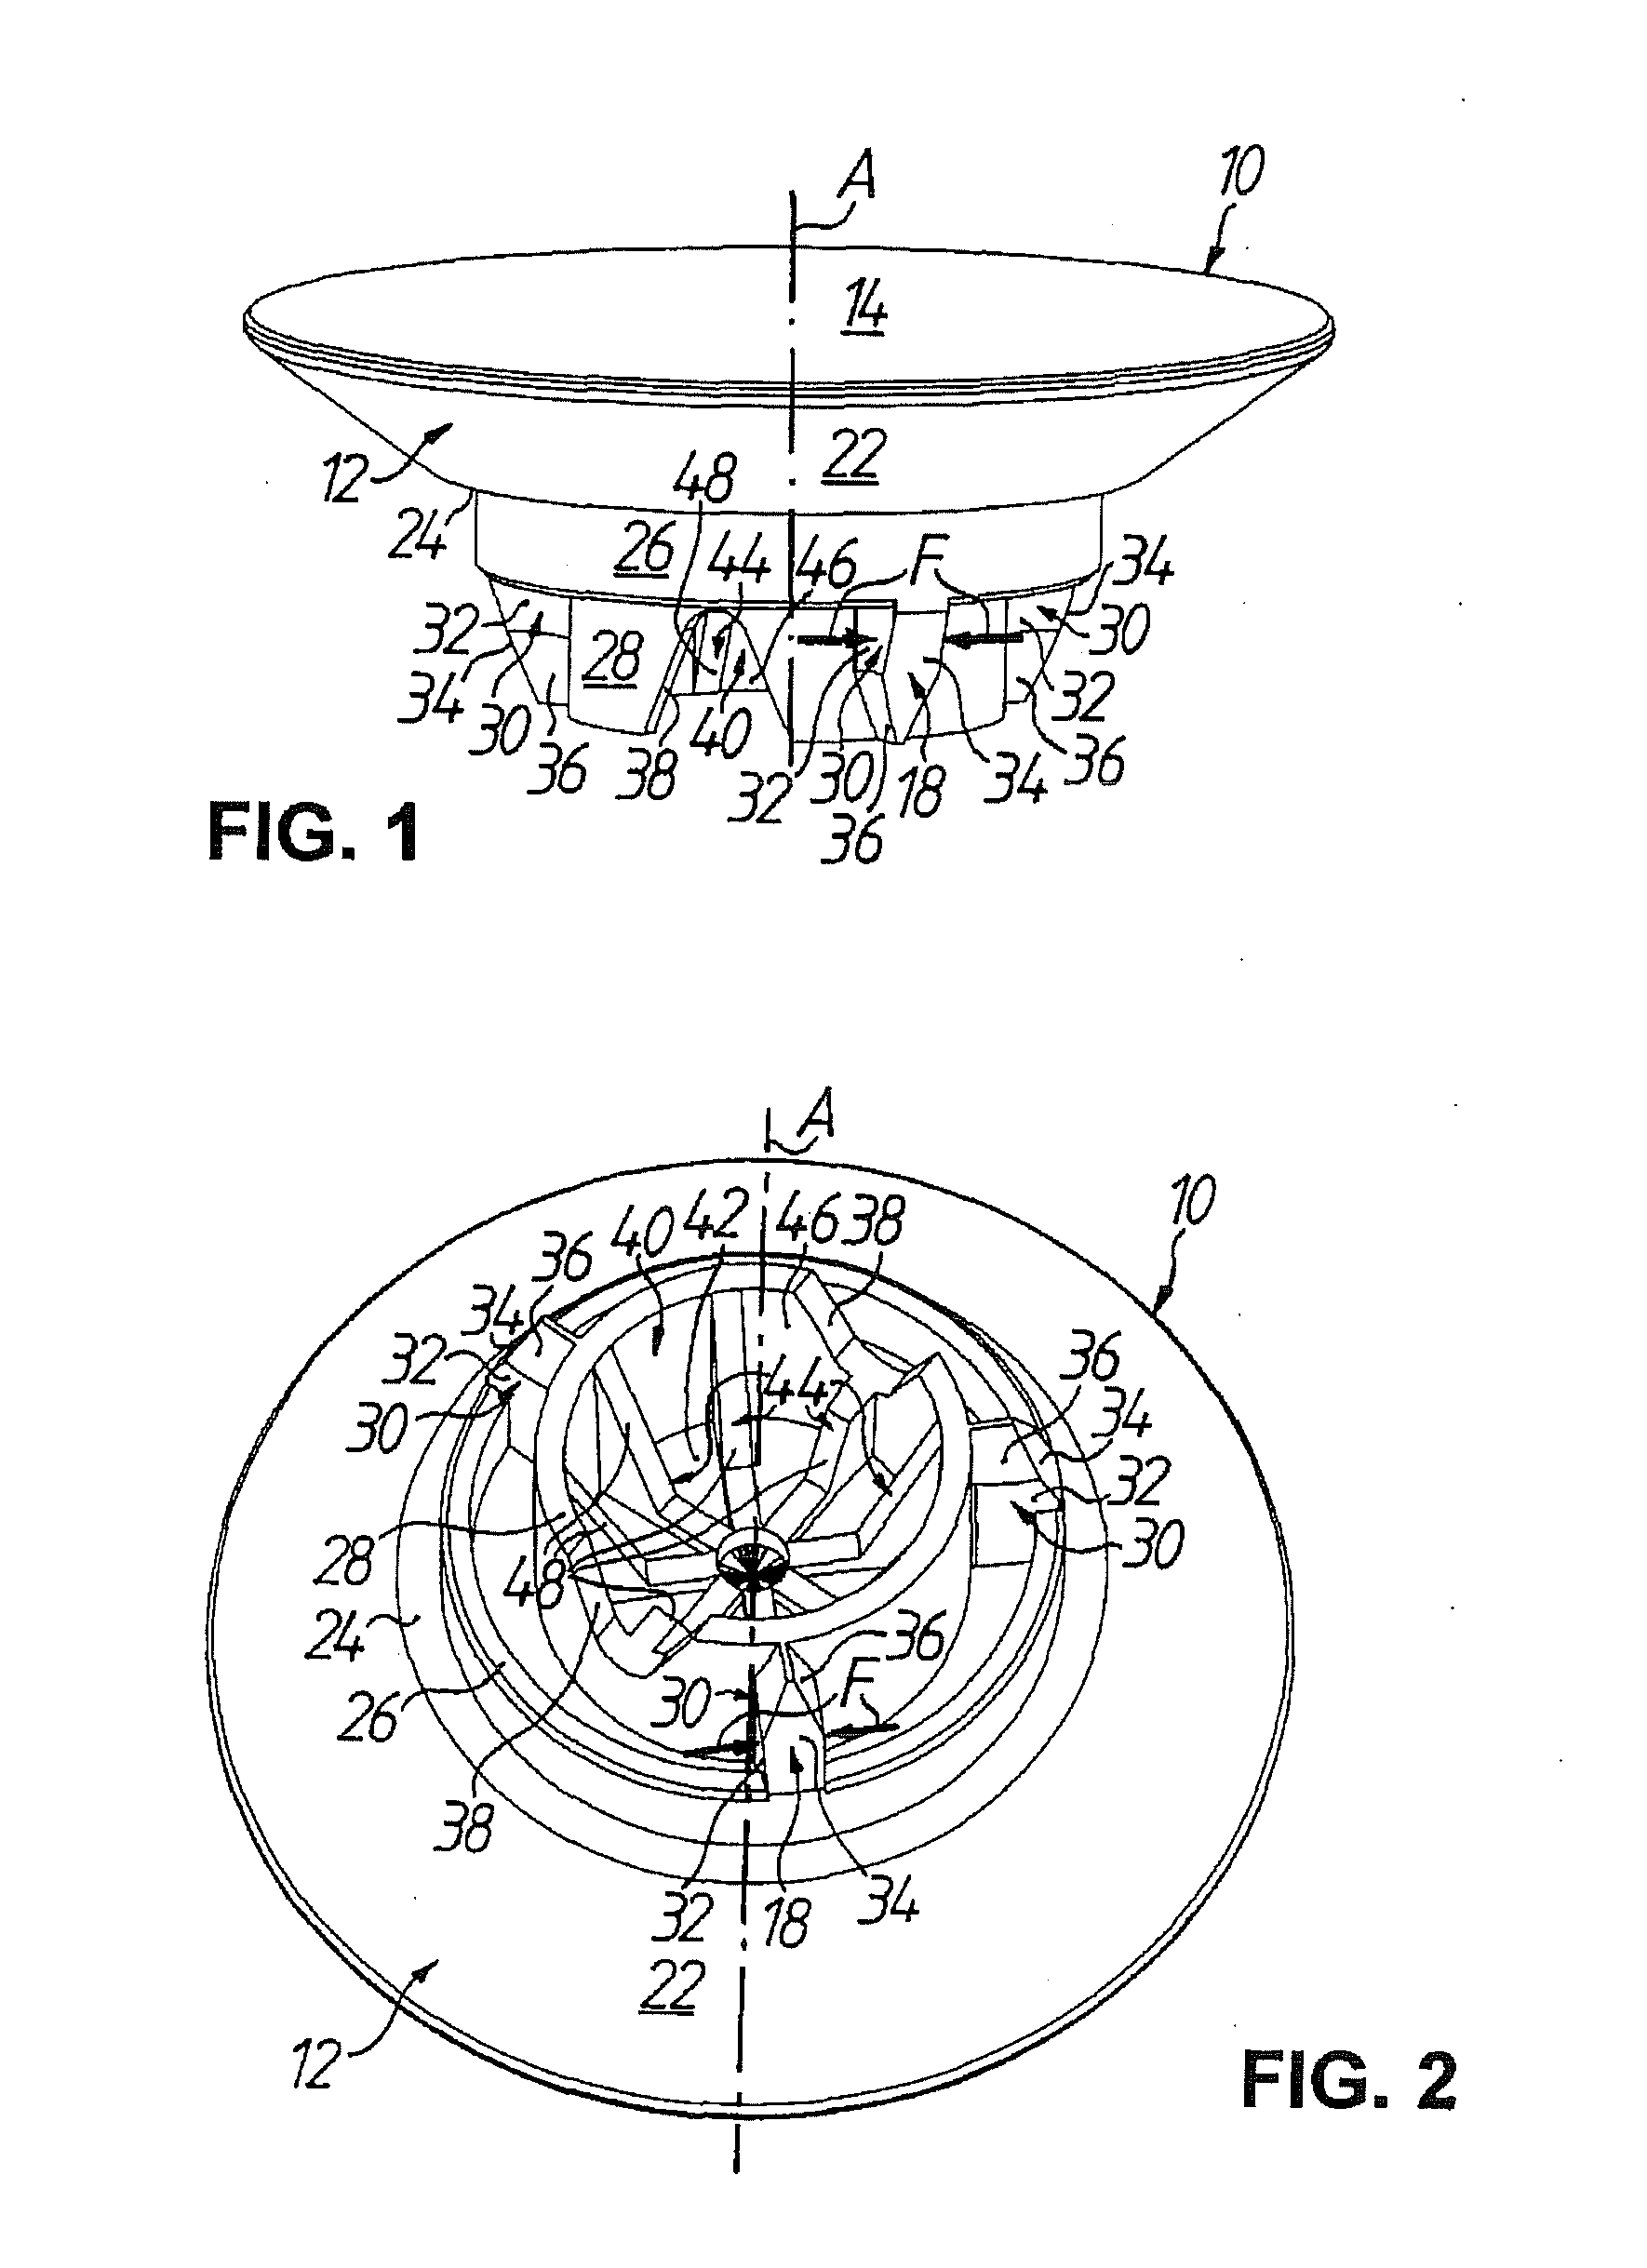 Block Piece for Holding an Optical Workpiece, in Particular a Spectacle Lens, for Processing Thereof, and Method for Manufacturing Spectacle Lenses According to a Prescription